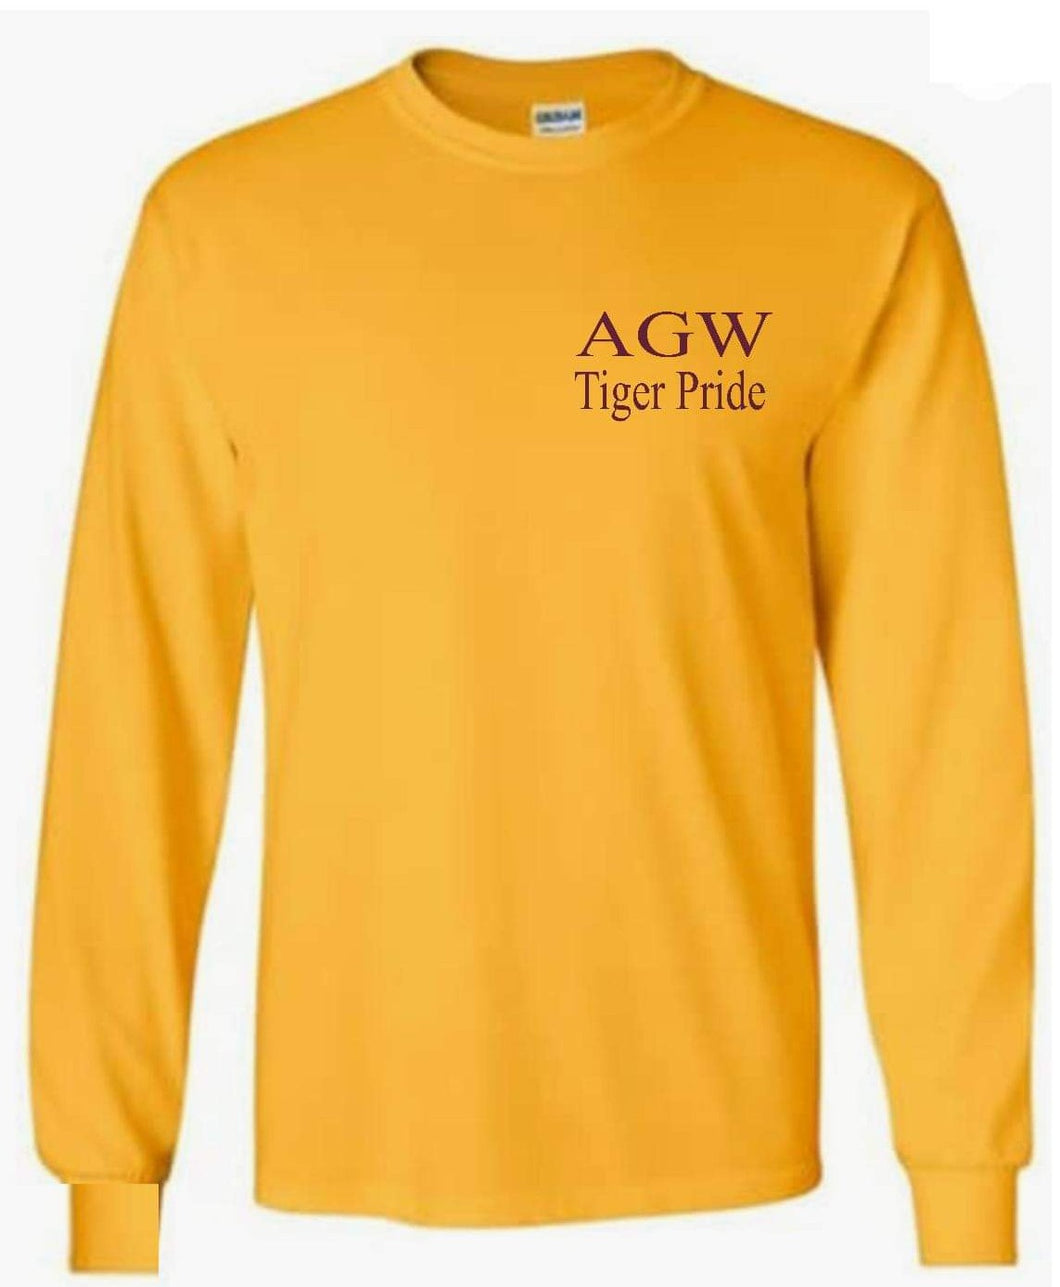 Yellow Gold Long Sleeve Shirt with AGWTP embroidery in yellow gold and maroon thread